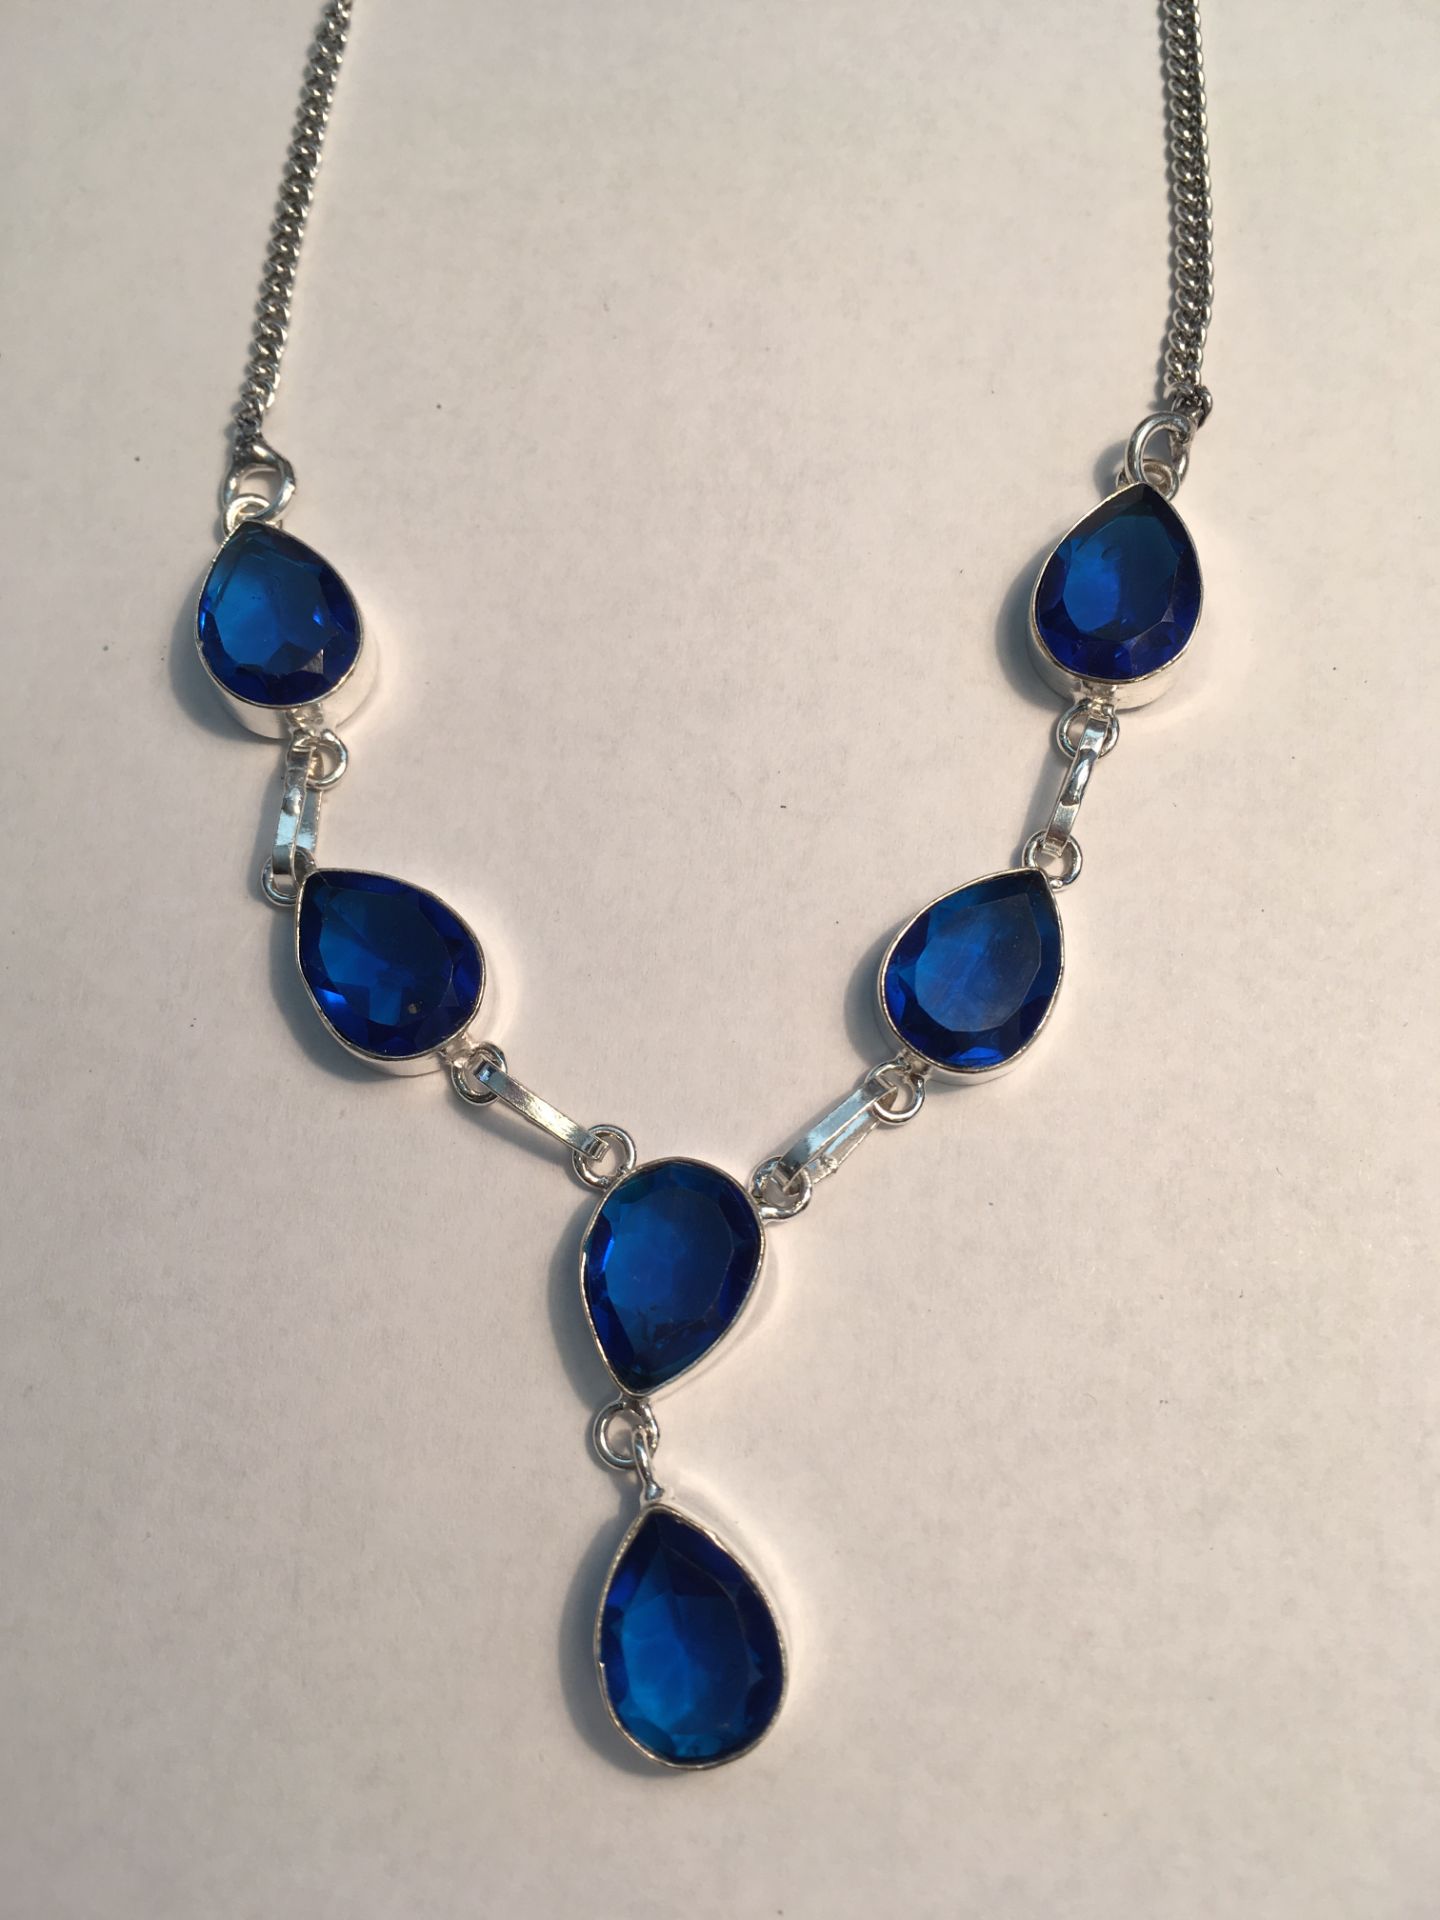 Sapphire Gems .925 Silver Jewellery Necklace 18 Inches - Image 2 of 2